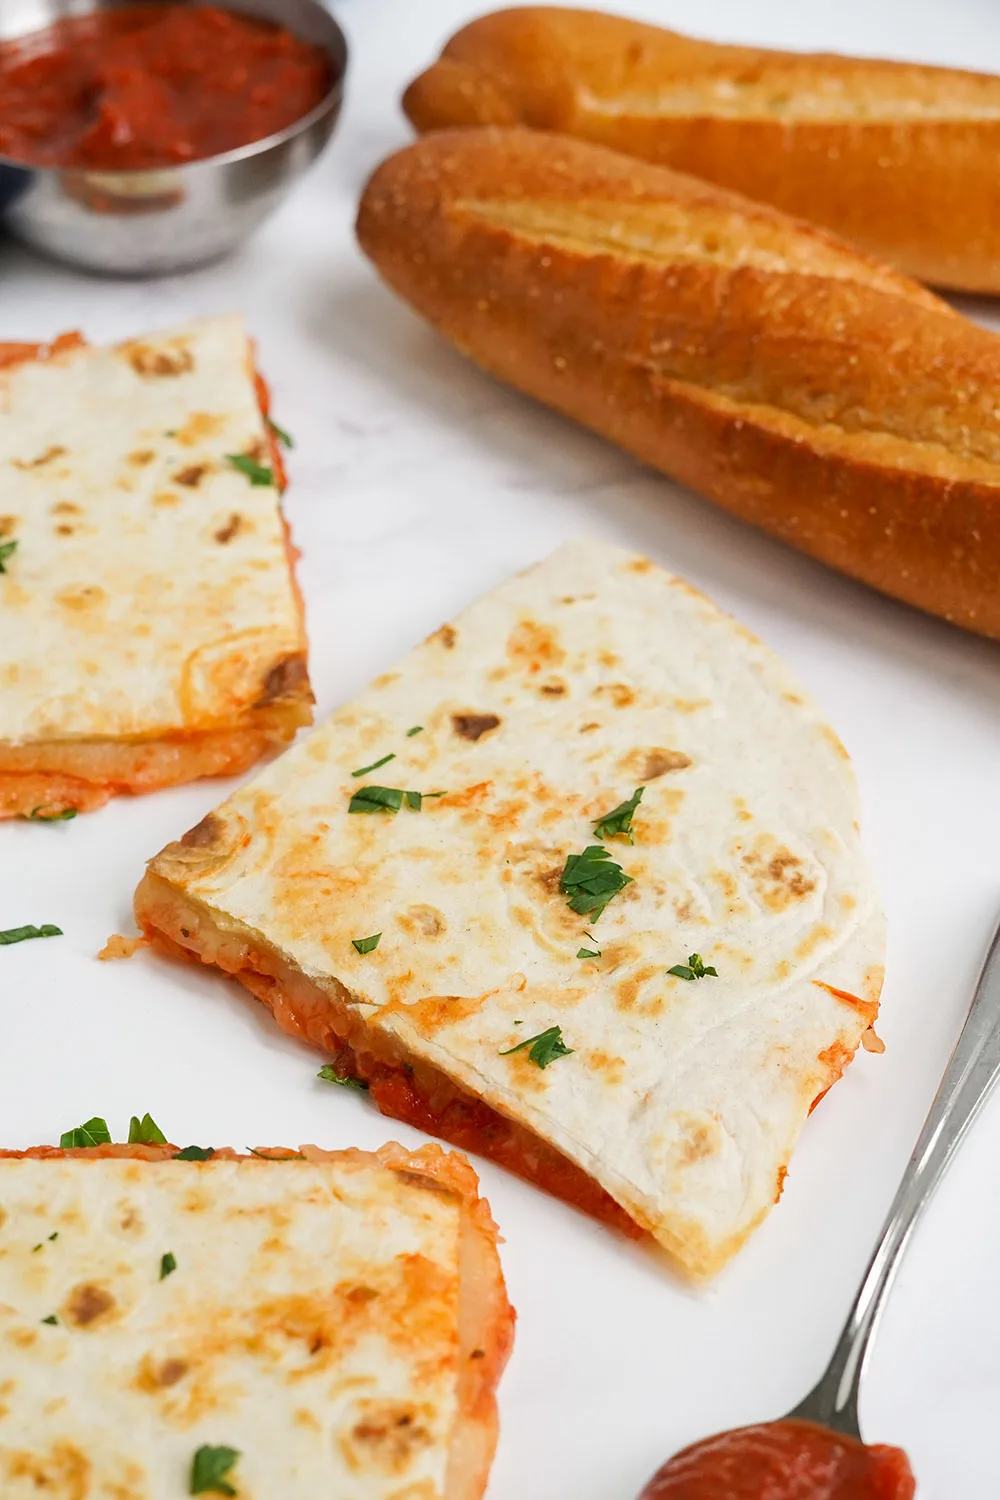 Sliced pepperoni pizza quesadillas next to loaves of bread.